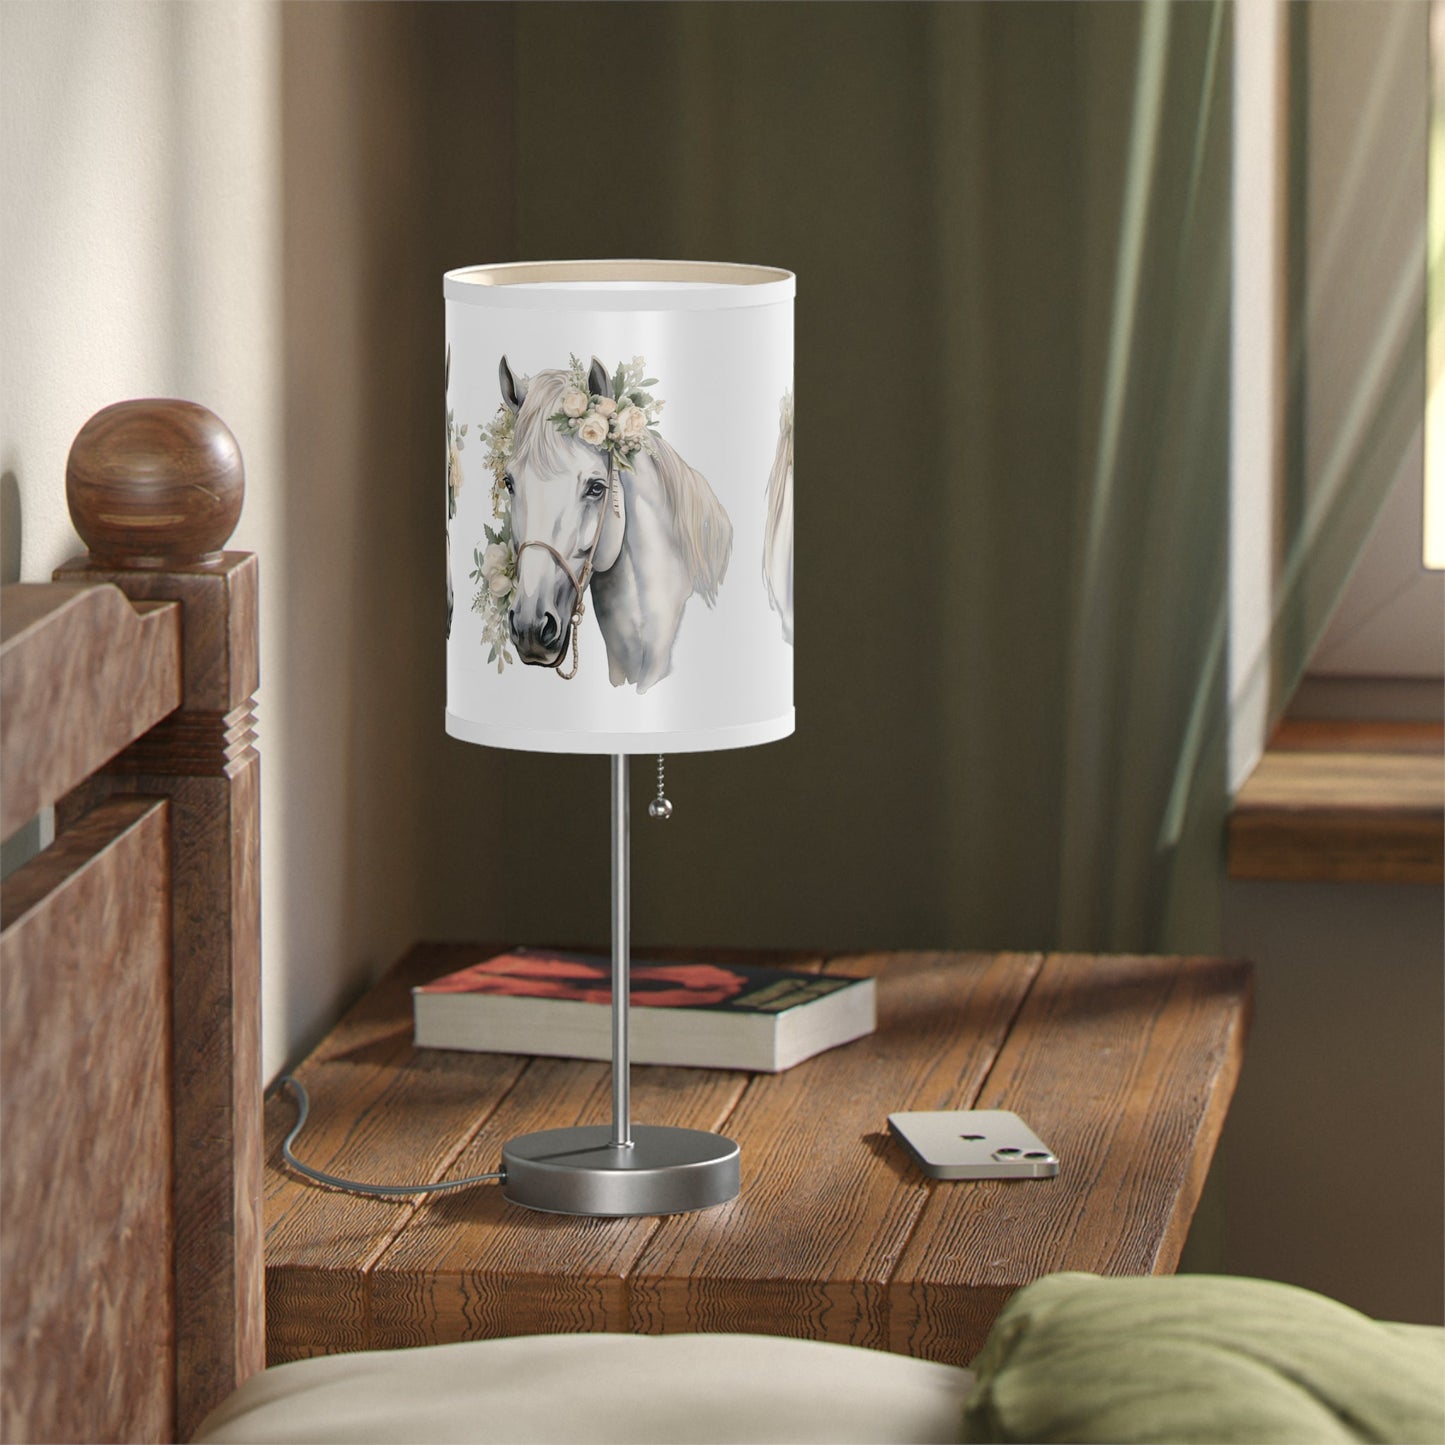 White Horse Head Lamp, Perfect Girls Room Fantasy Floral Pony Head Design Accent Lamp, Fancy Ladies Accent, Equine Desk Lamp, Office light - FlooredByArt